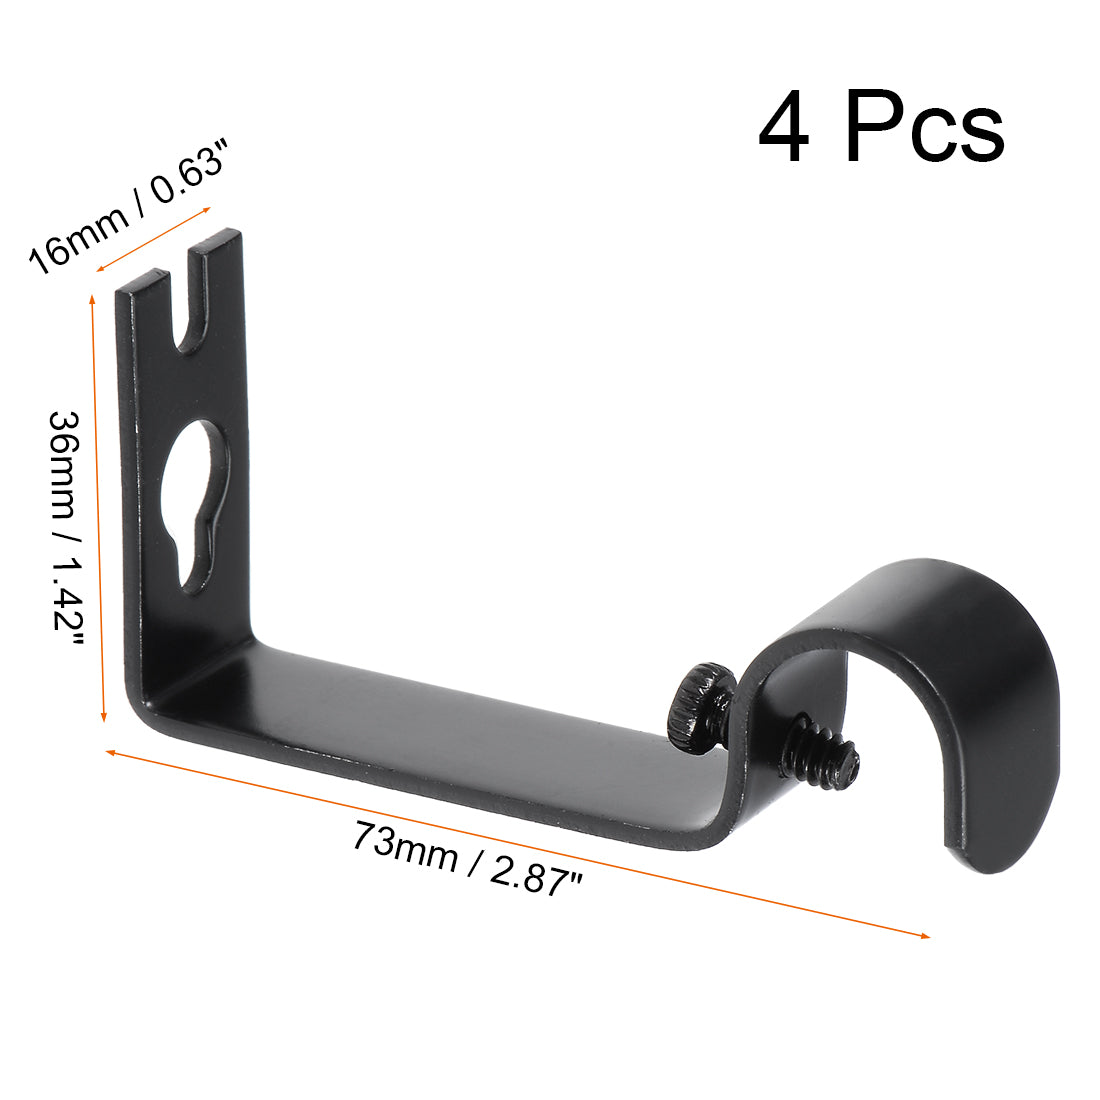 uxcell Uxcell Curtain Rod Bracket Iron Single Holder Support for 16mm Drapery Rod, 73 x 36 x 16mm Black 4Pcs